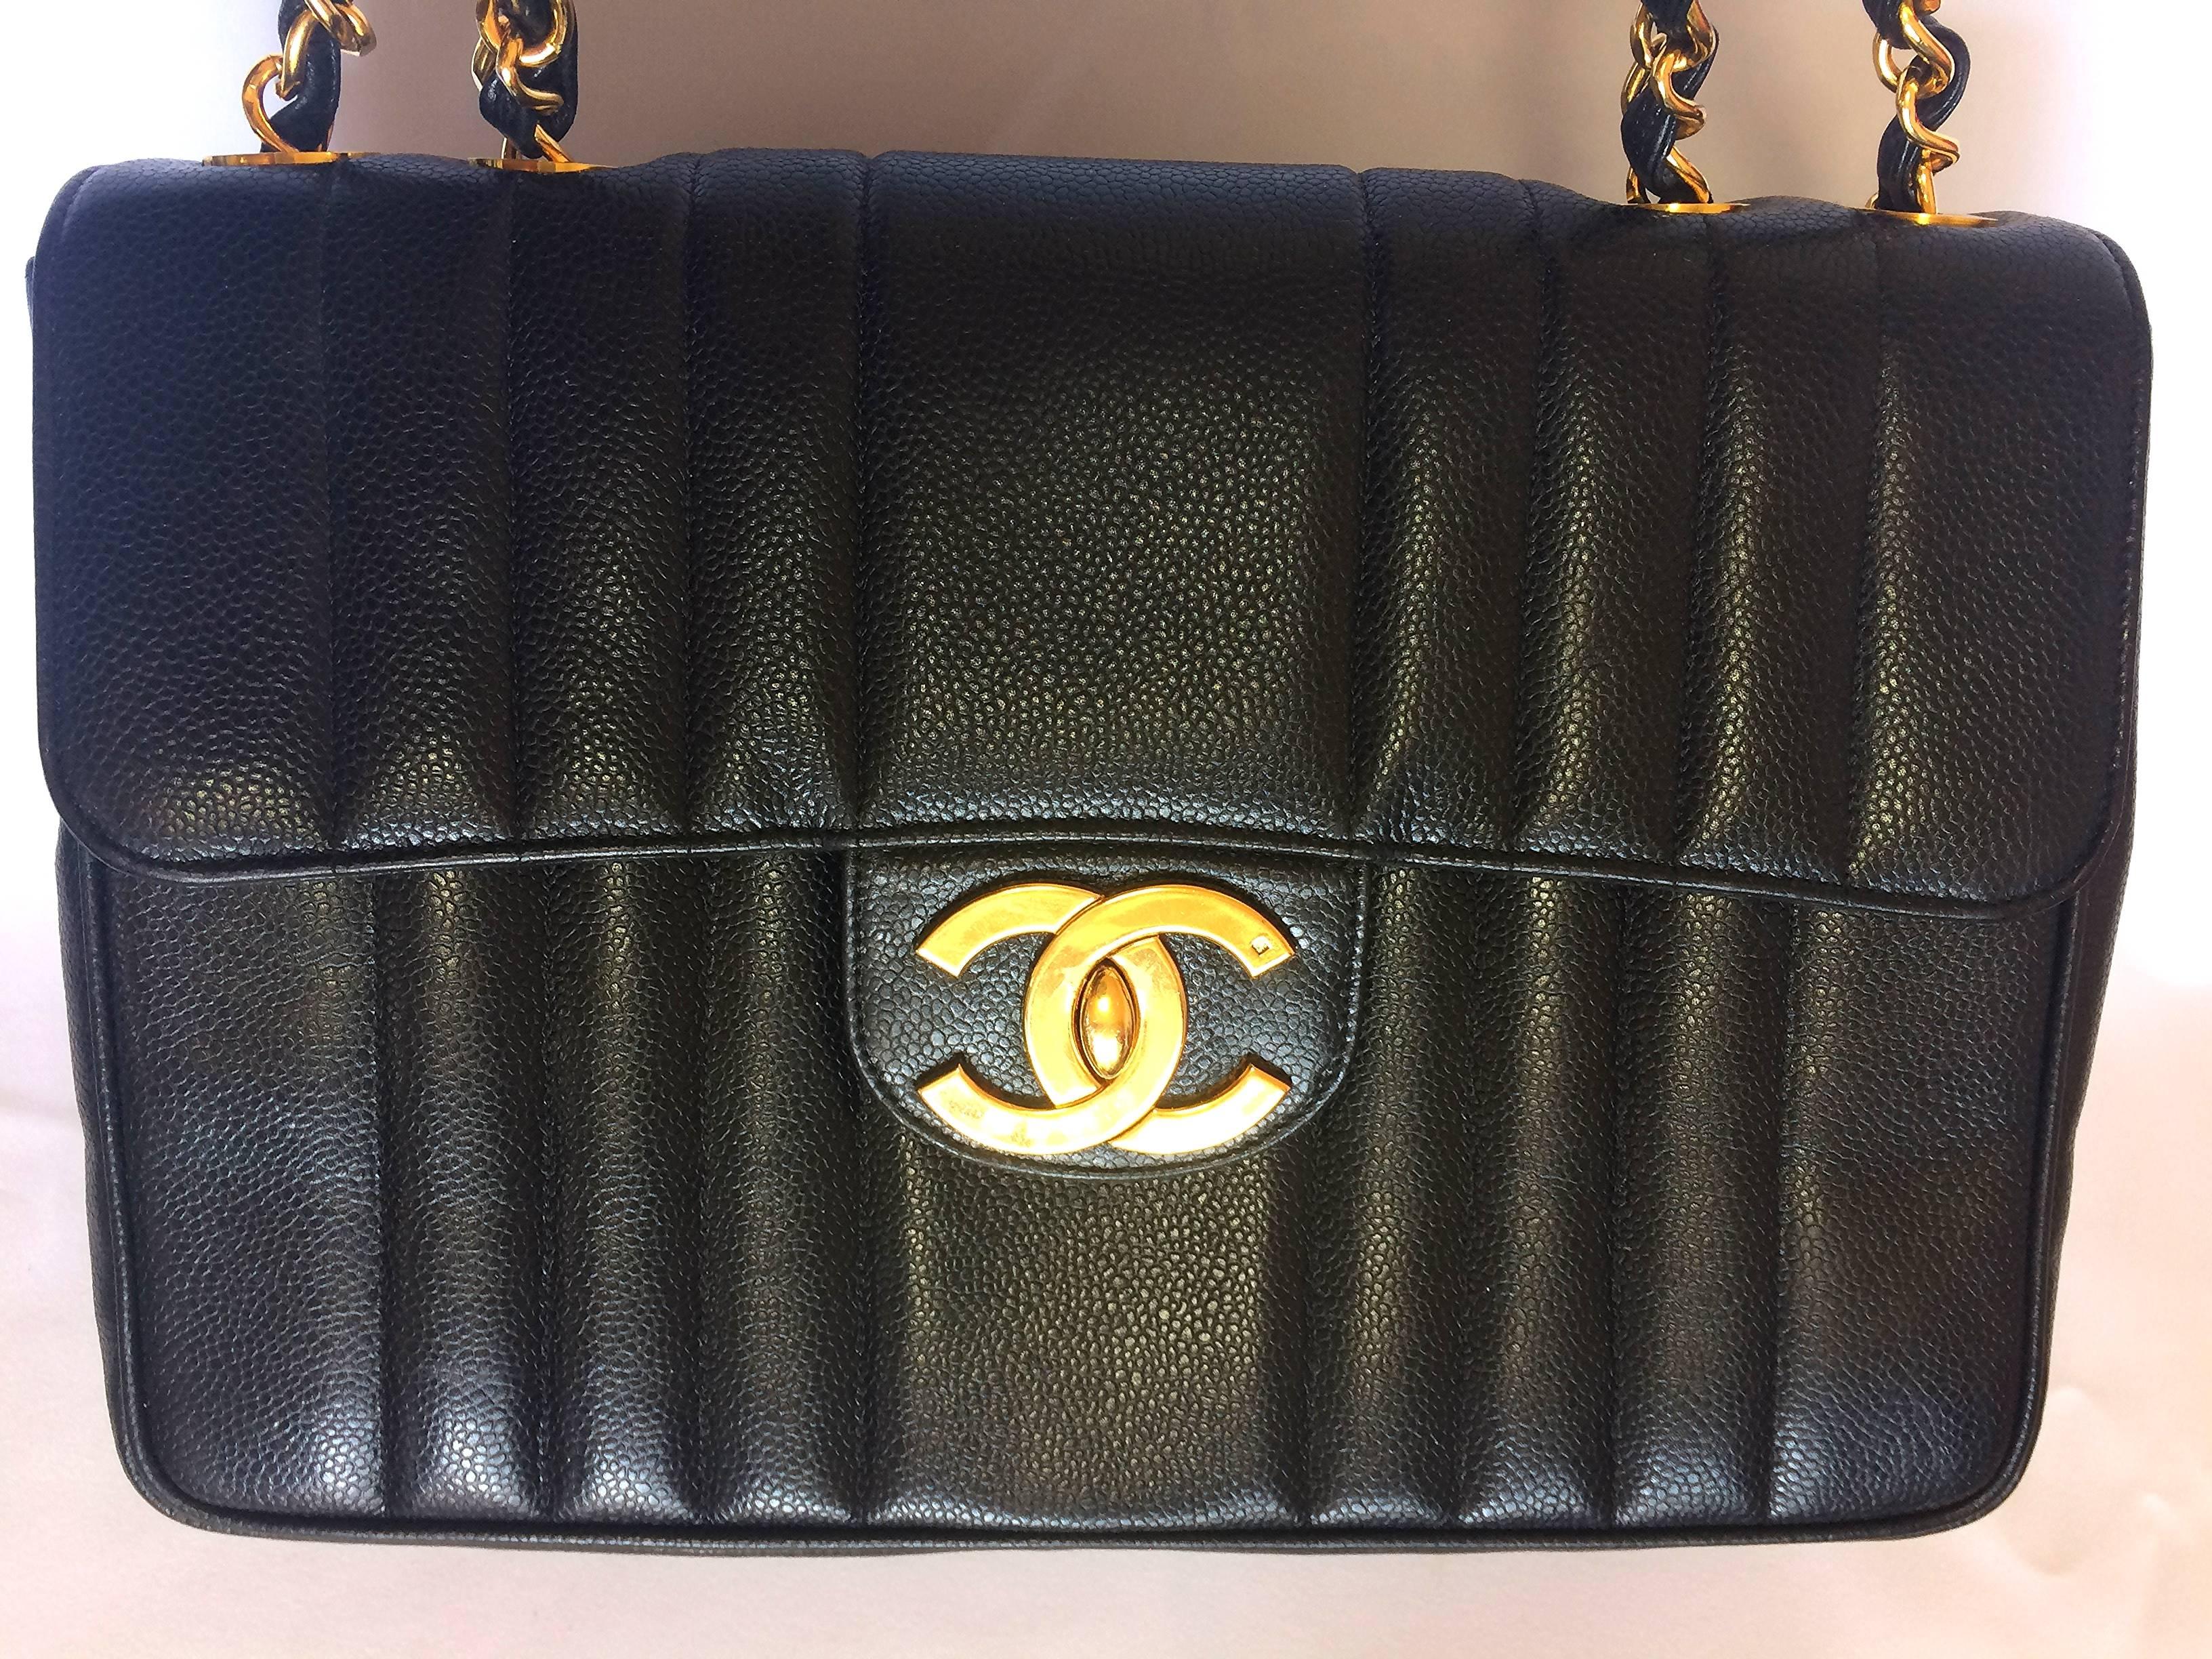 1990s. Vintage CHANEL black 2.55 jumbo caviar leather large shoulder bag with golden CC Vertical stitch. Classic caviar leather.

Perfect life-time classic bag for your life....

Introducing one of the most popular and classic masterpiece bags from